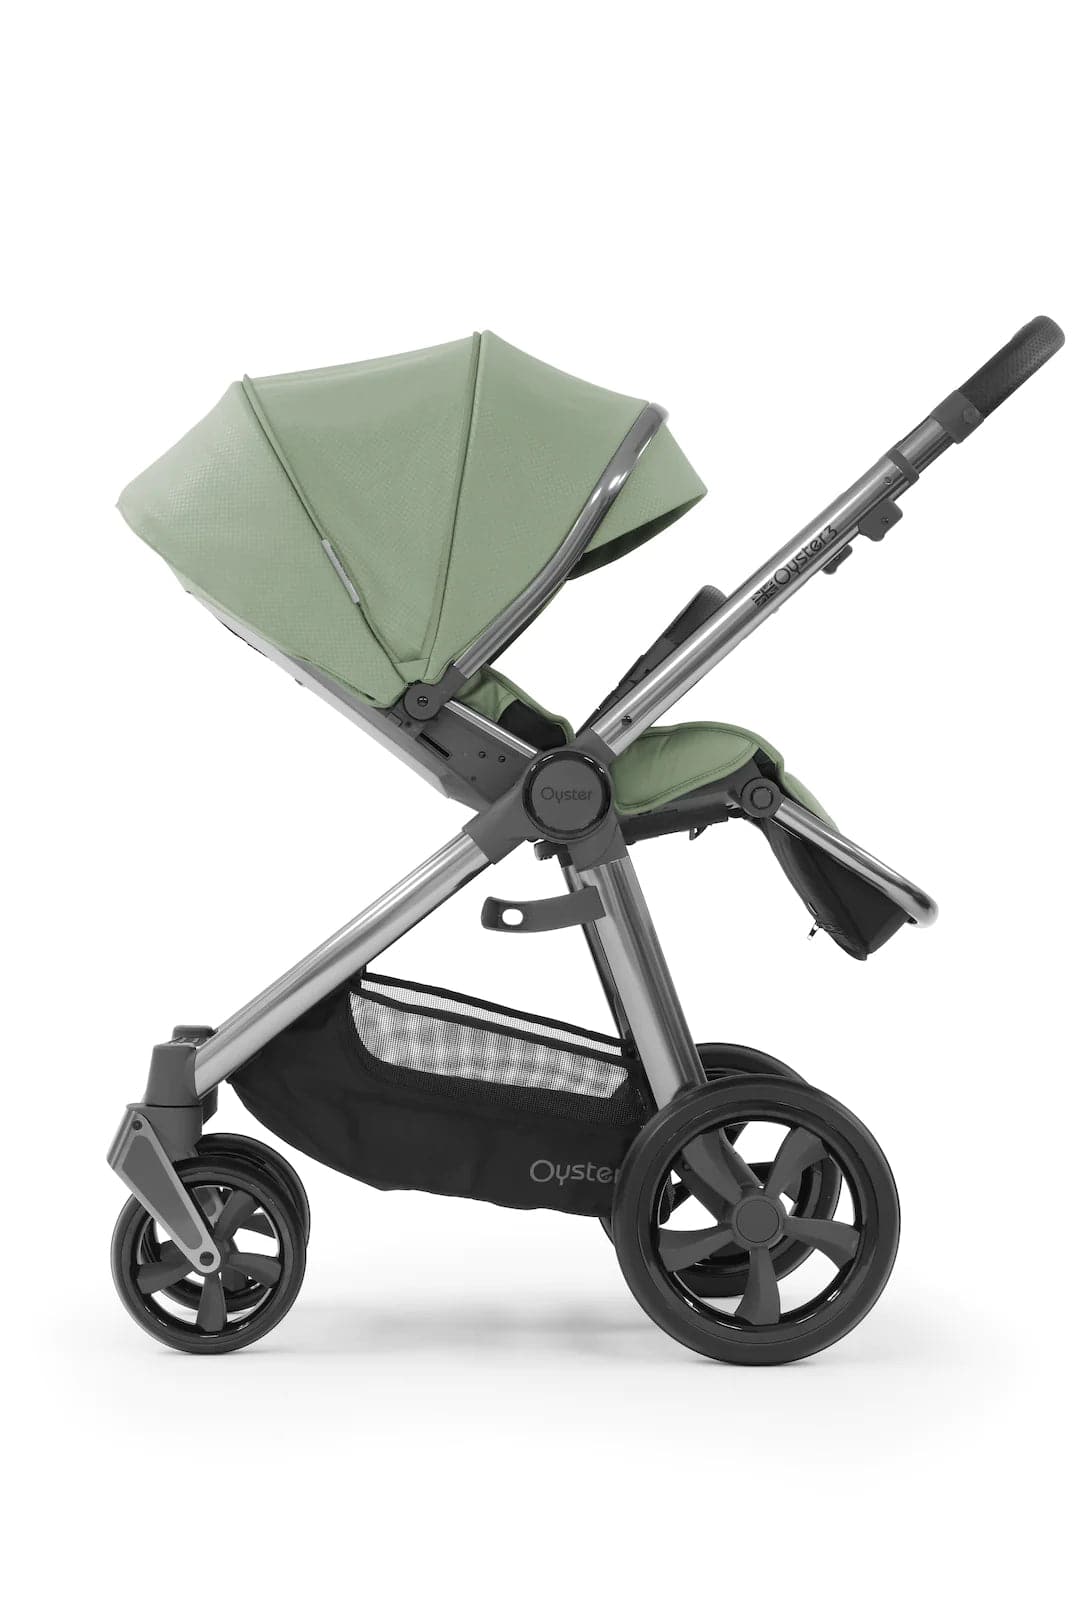 BabyStyle Oyster 3 Pushchair - Spearmint -  | For Your Little One